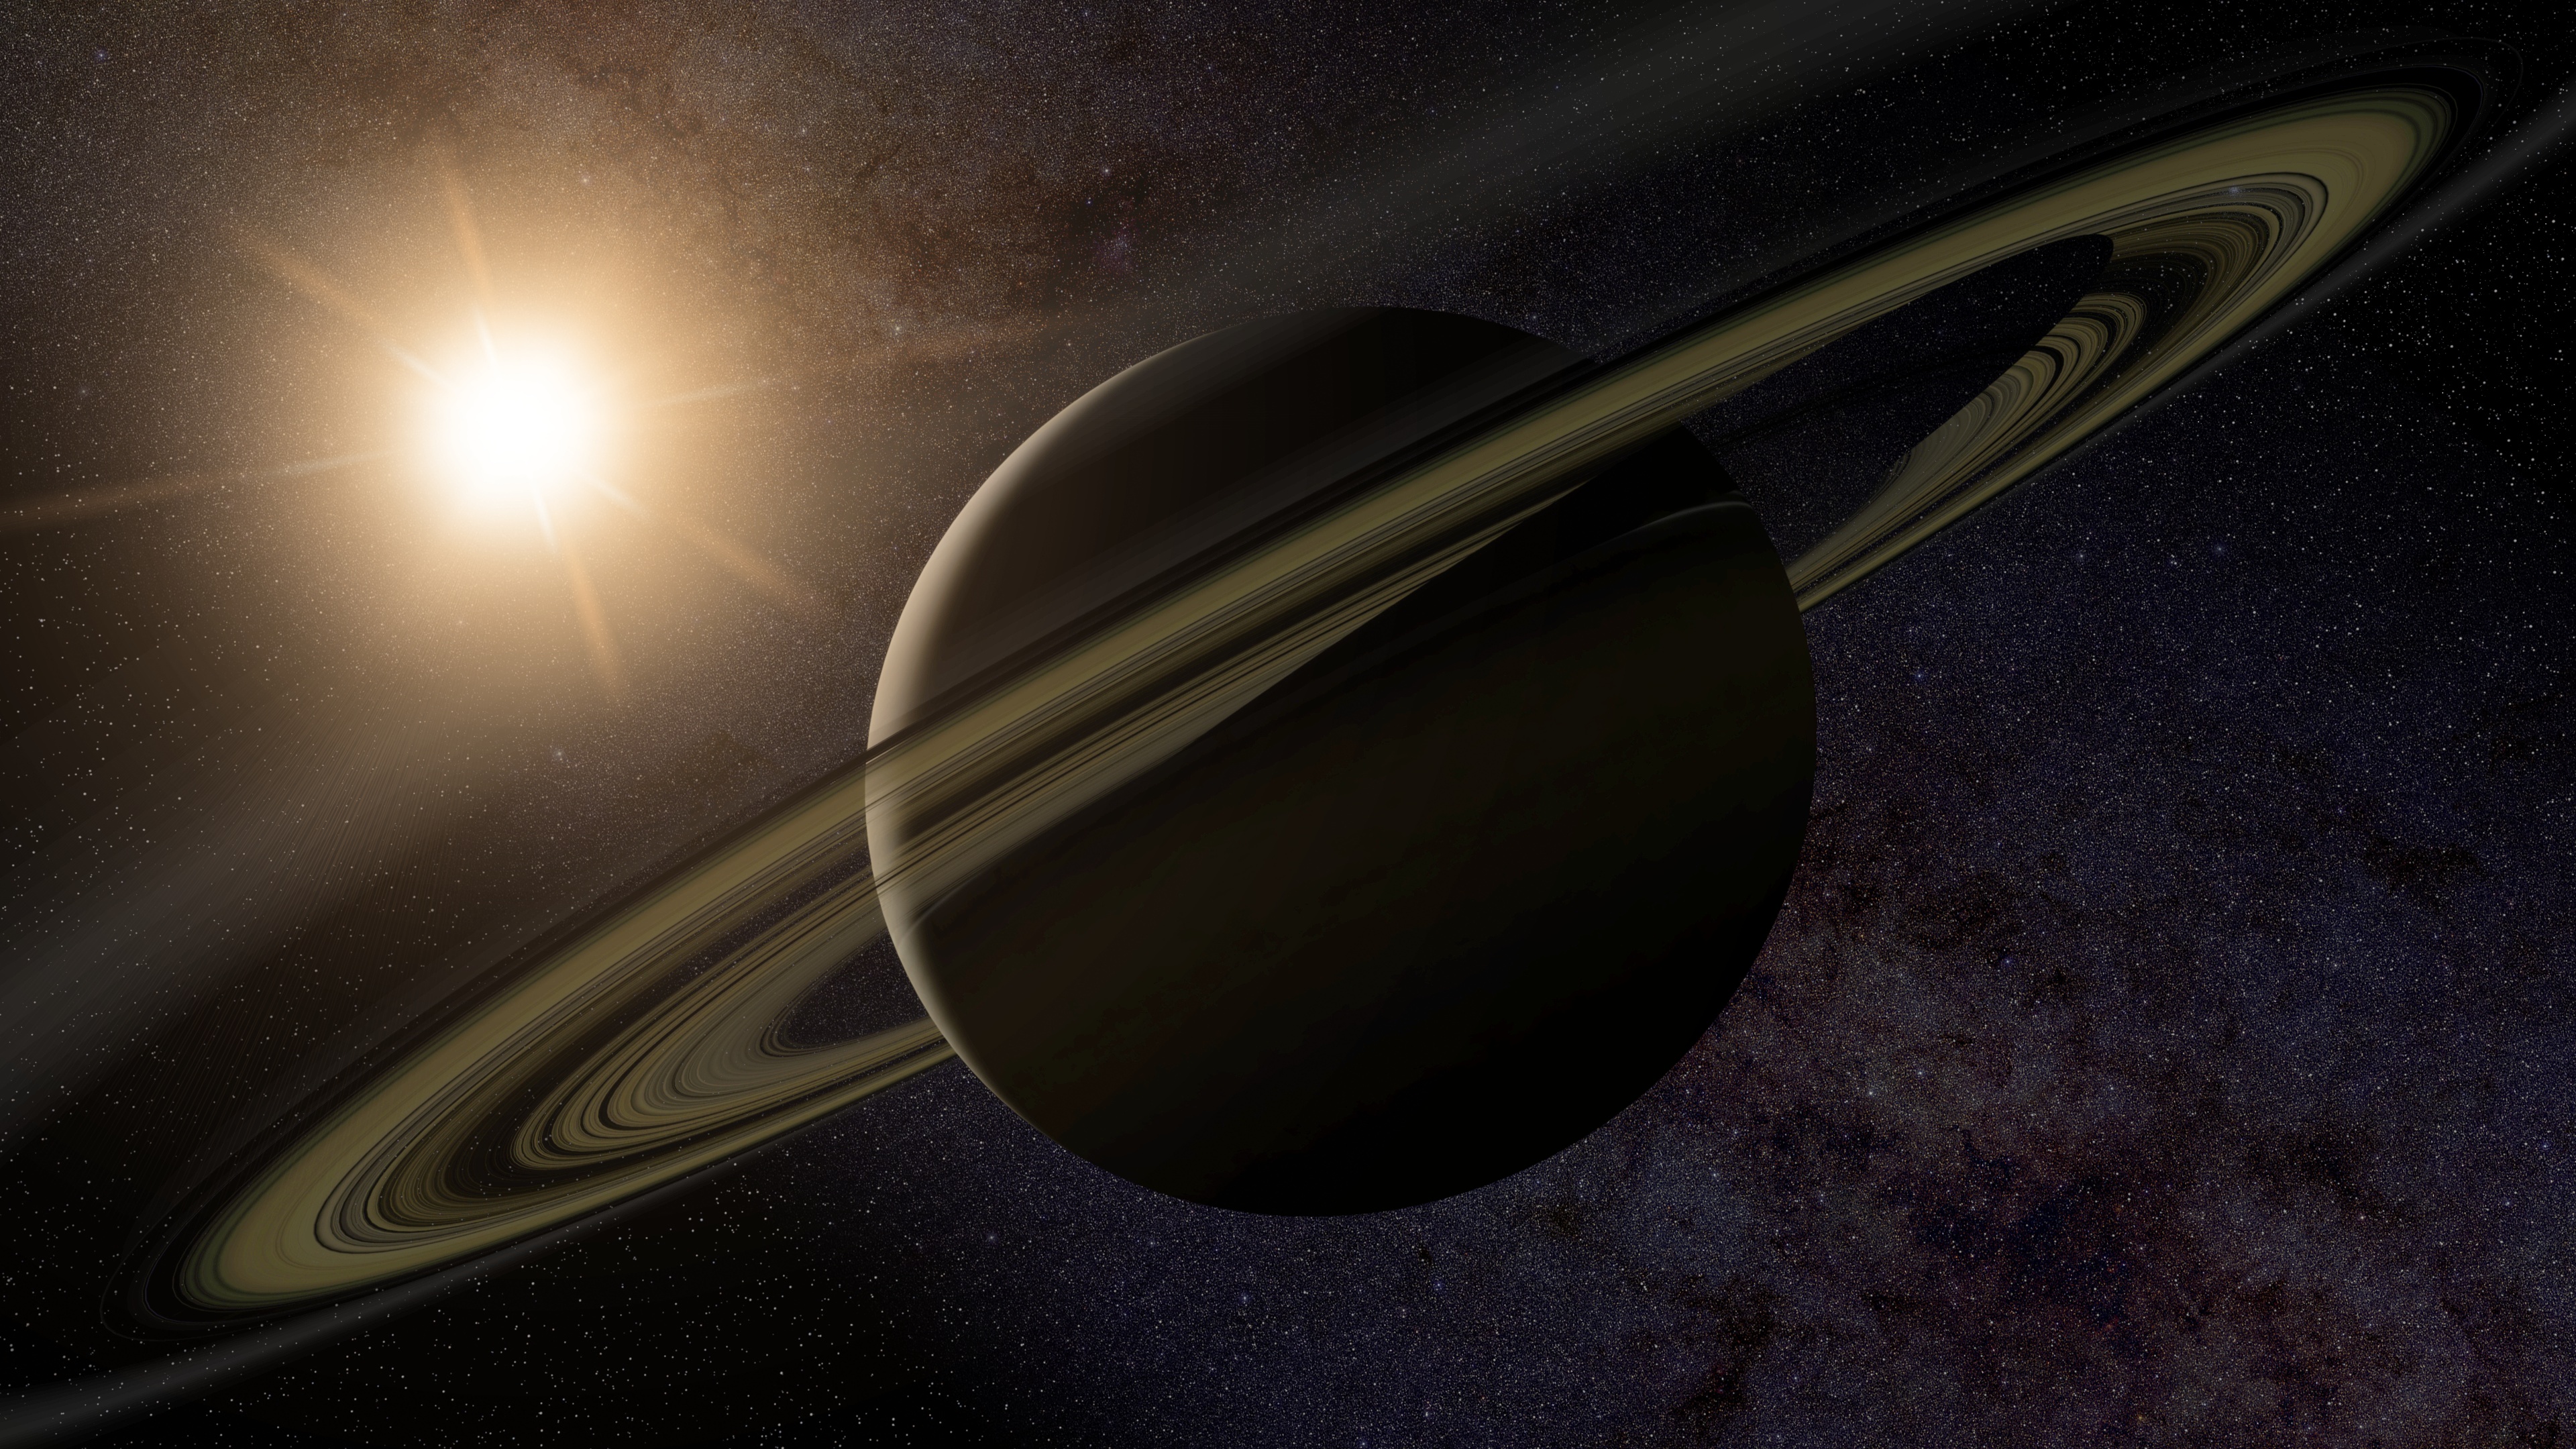 Hd desktop sun space planet sci fi saturn planetary ring download free picture